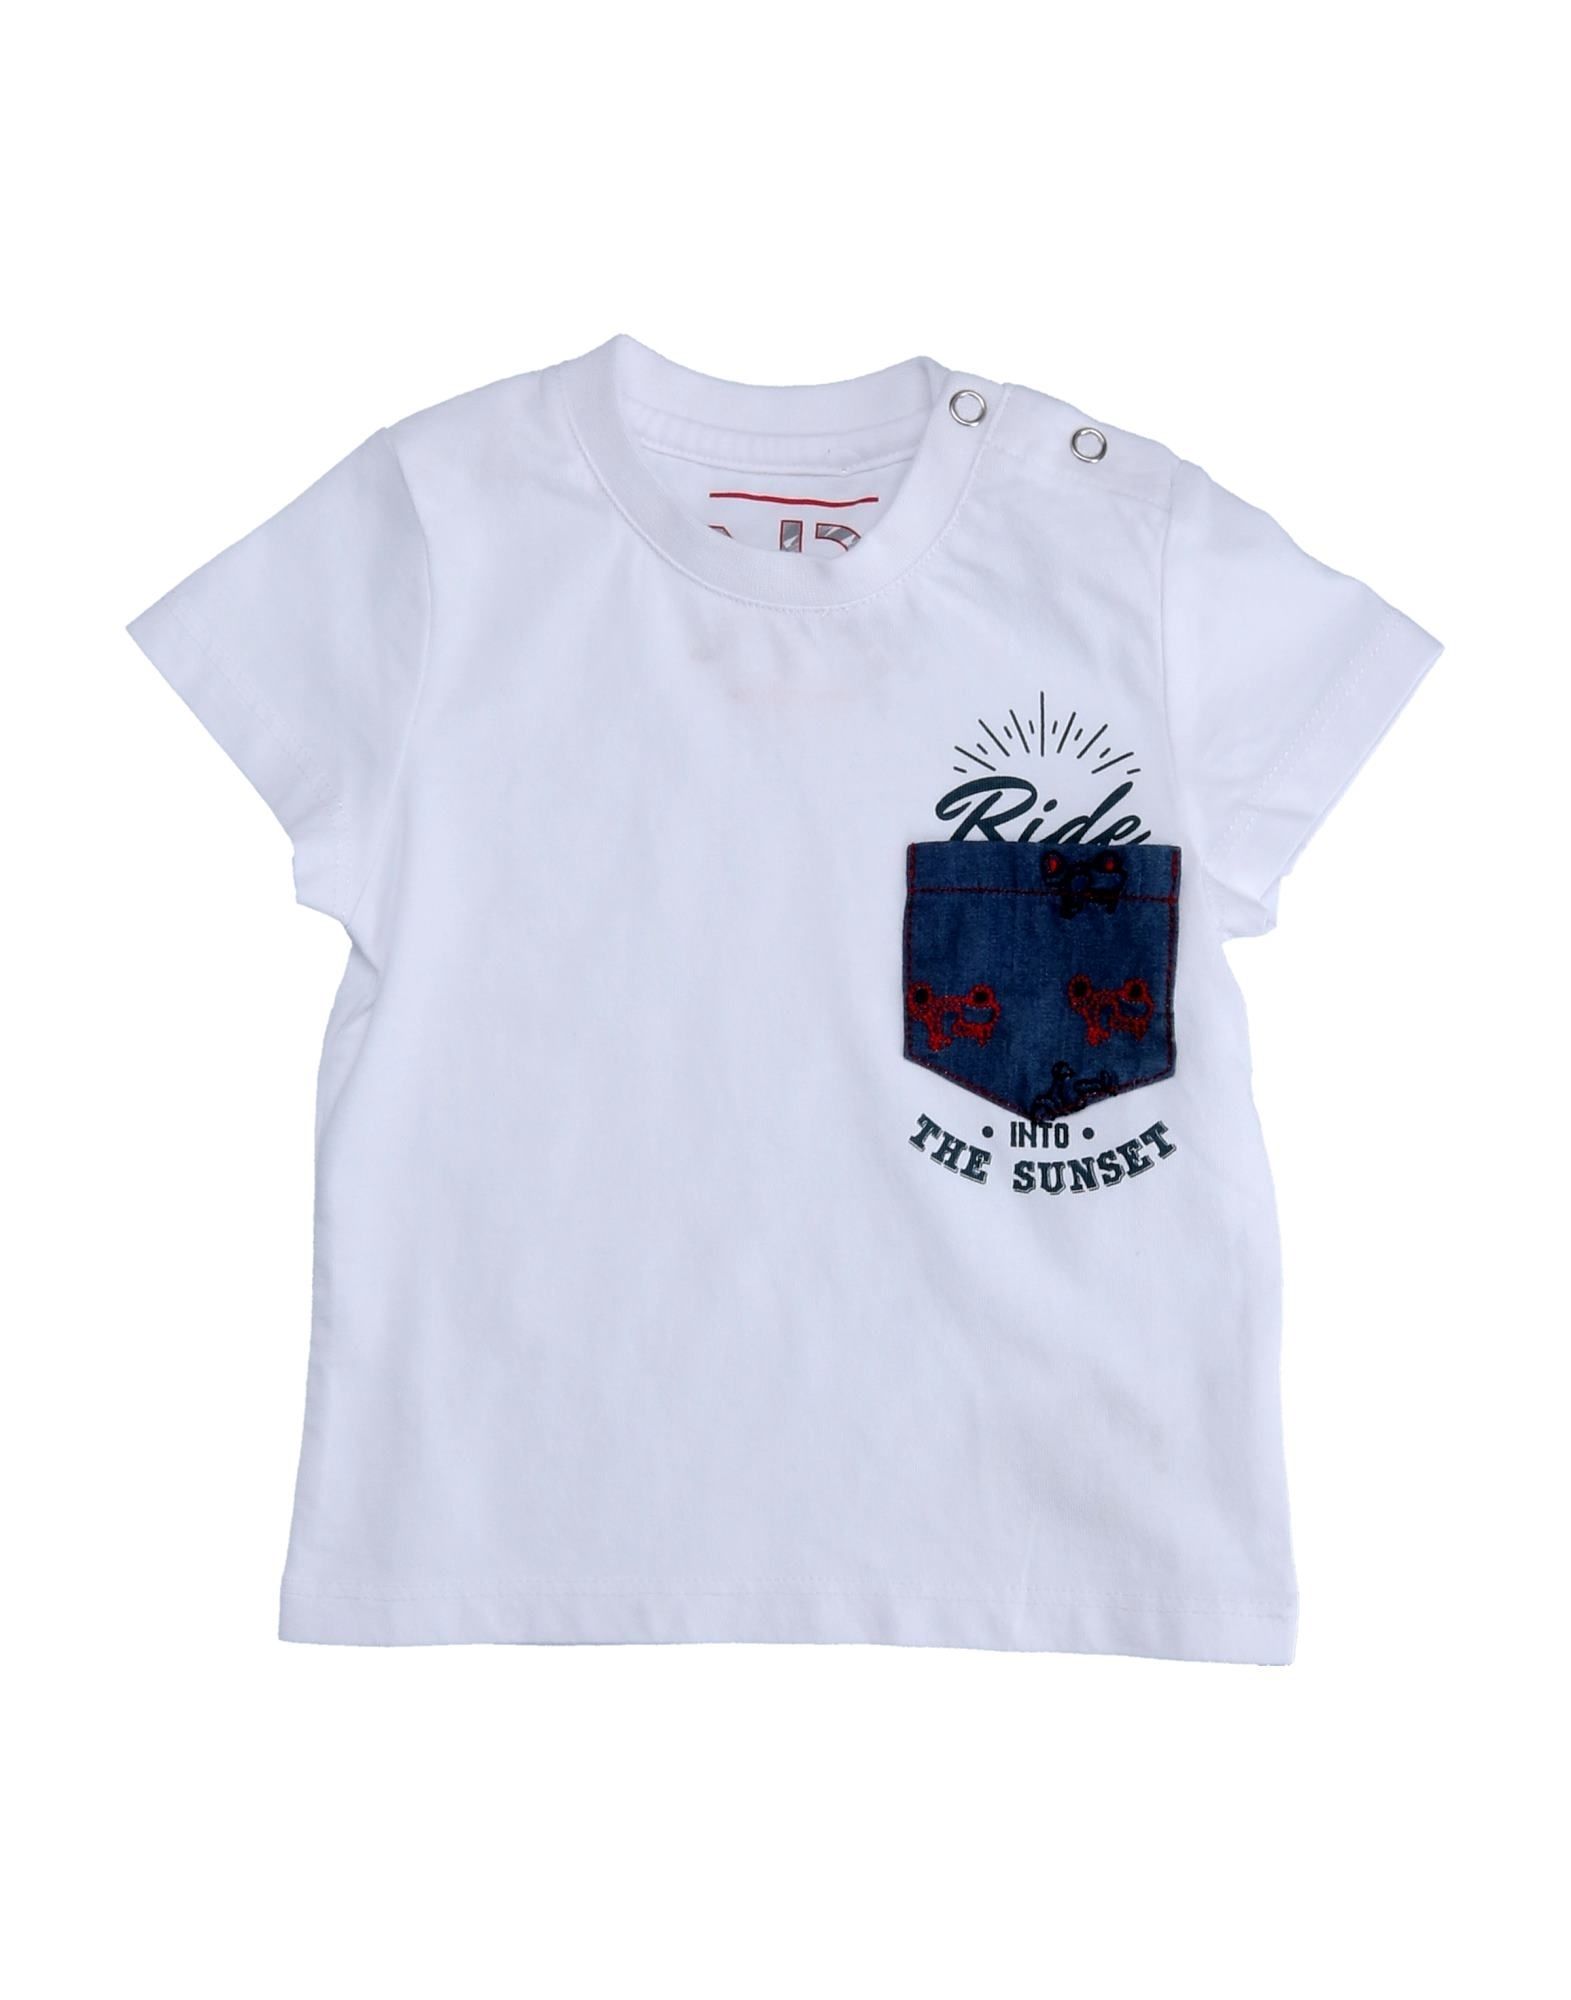 Ronnie Kay Kids' T-shirts In White